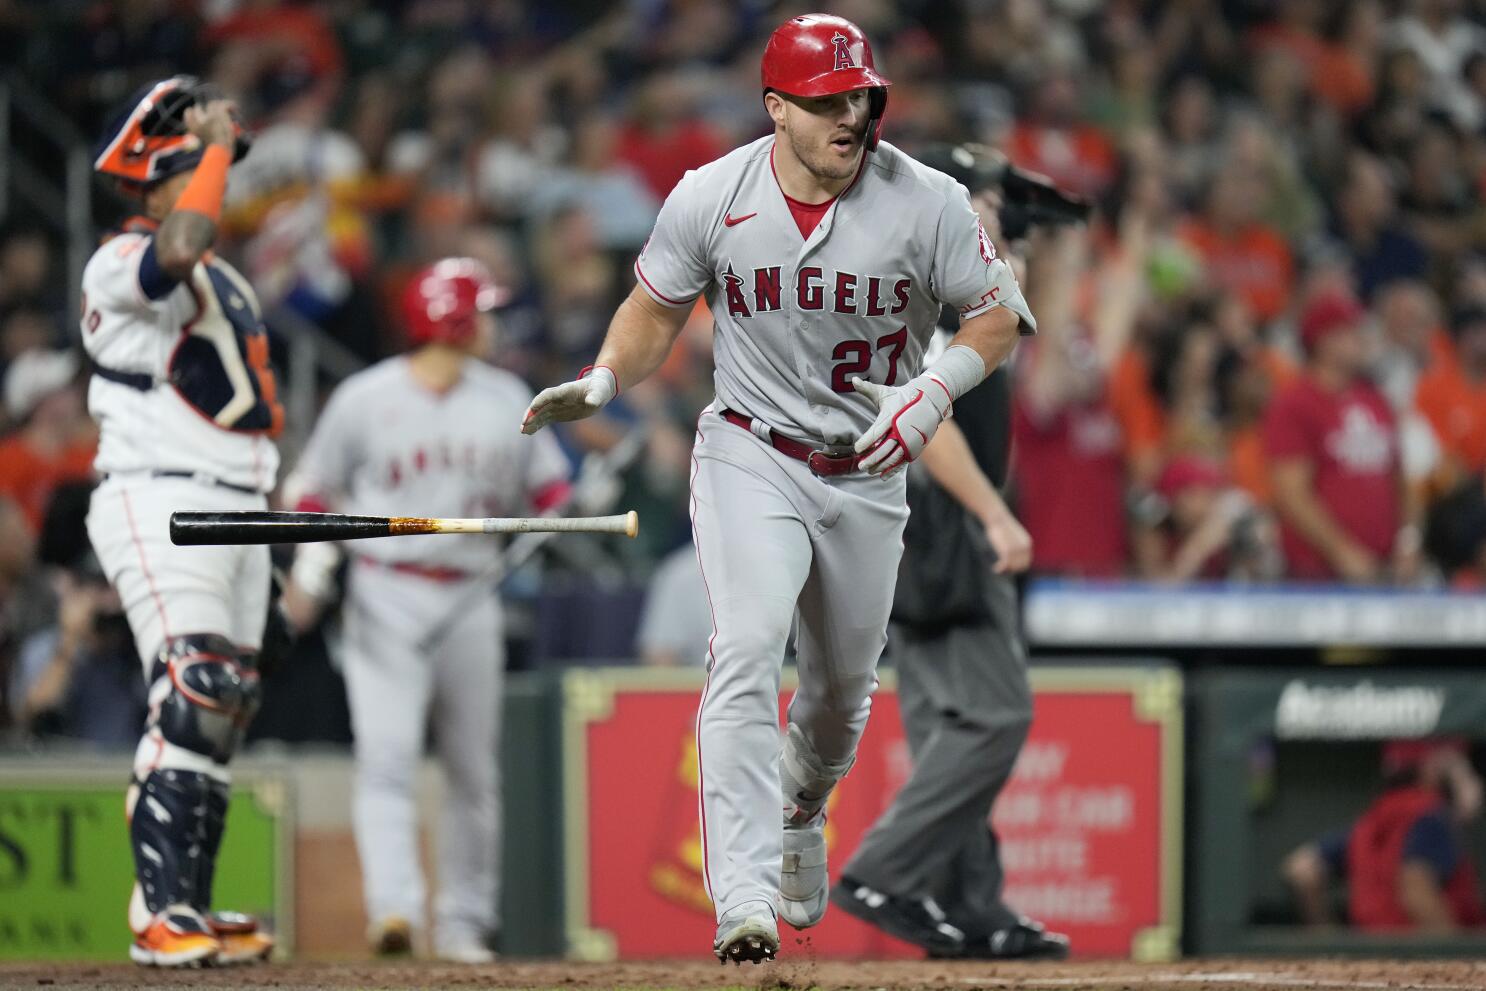 Codify on X: Mike Trout and Shohei Ohtani both went 0-for-3 with